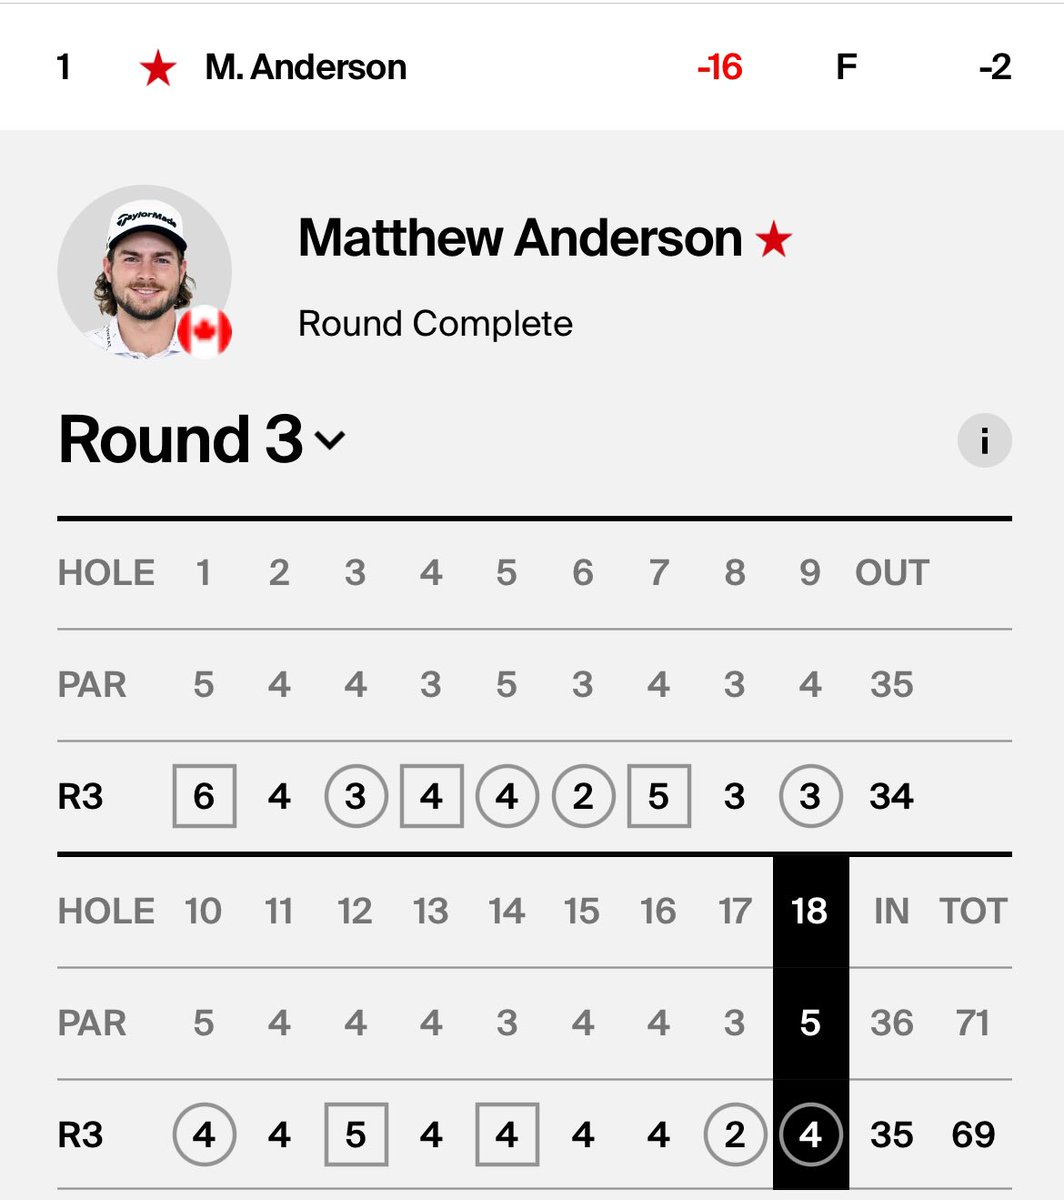 🇨🇦 Mississauga, ON’s Matt Anderson birdies the last two holes, including a clutch up-and-down and 8 footer on the last, to win the @PGATOURAmericas 69th DCP Brazil Open @TheGolfOntario @GolfCanada